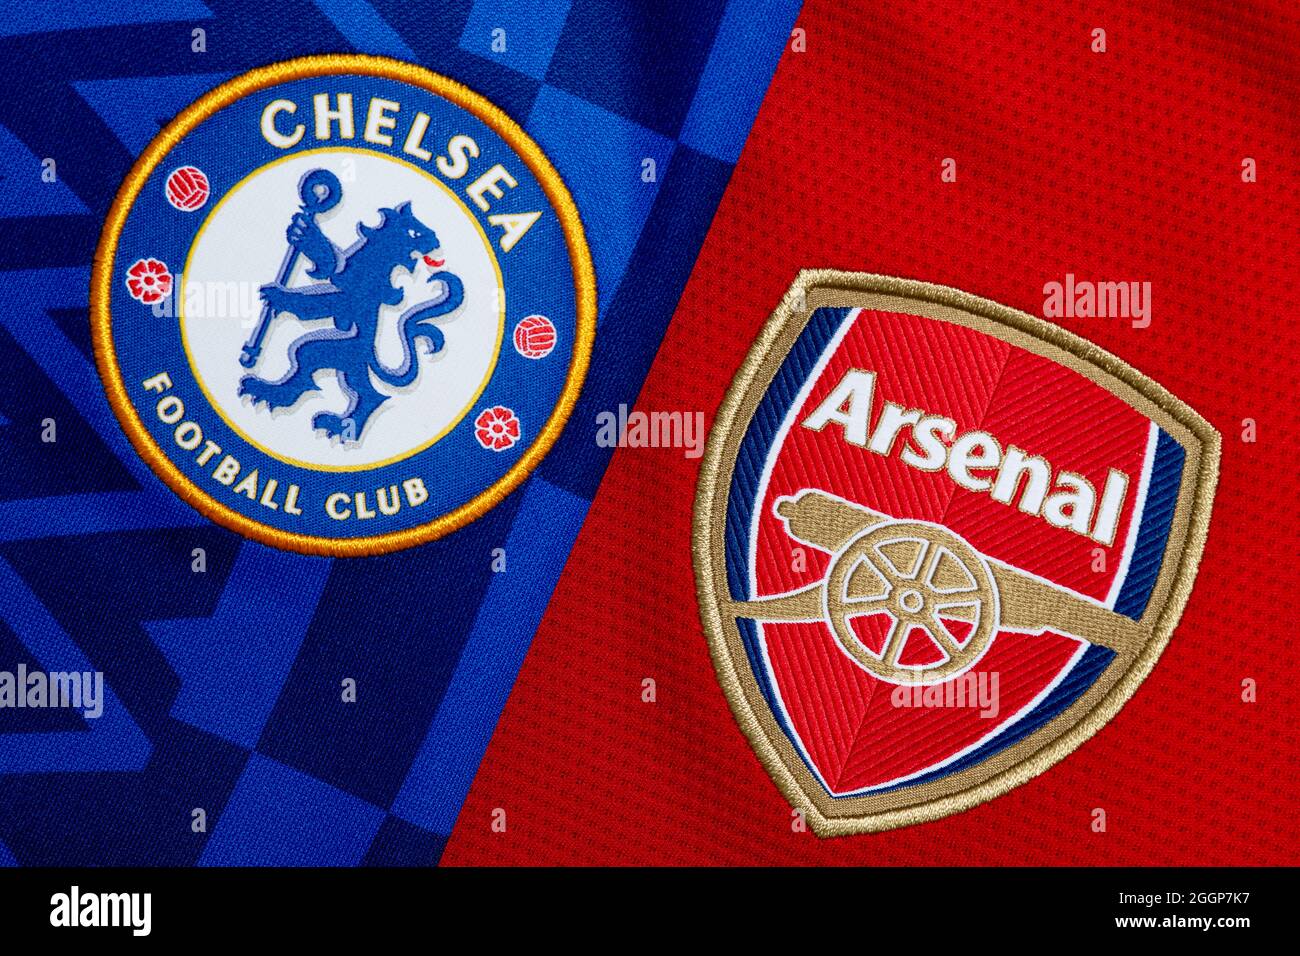 Close up of Arsenal & Chelsea club crest. Stock Photo